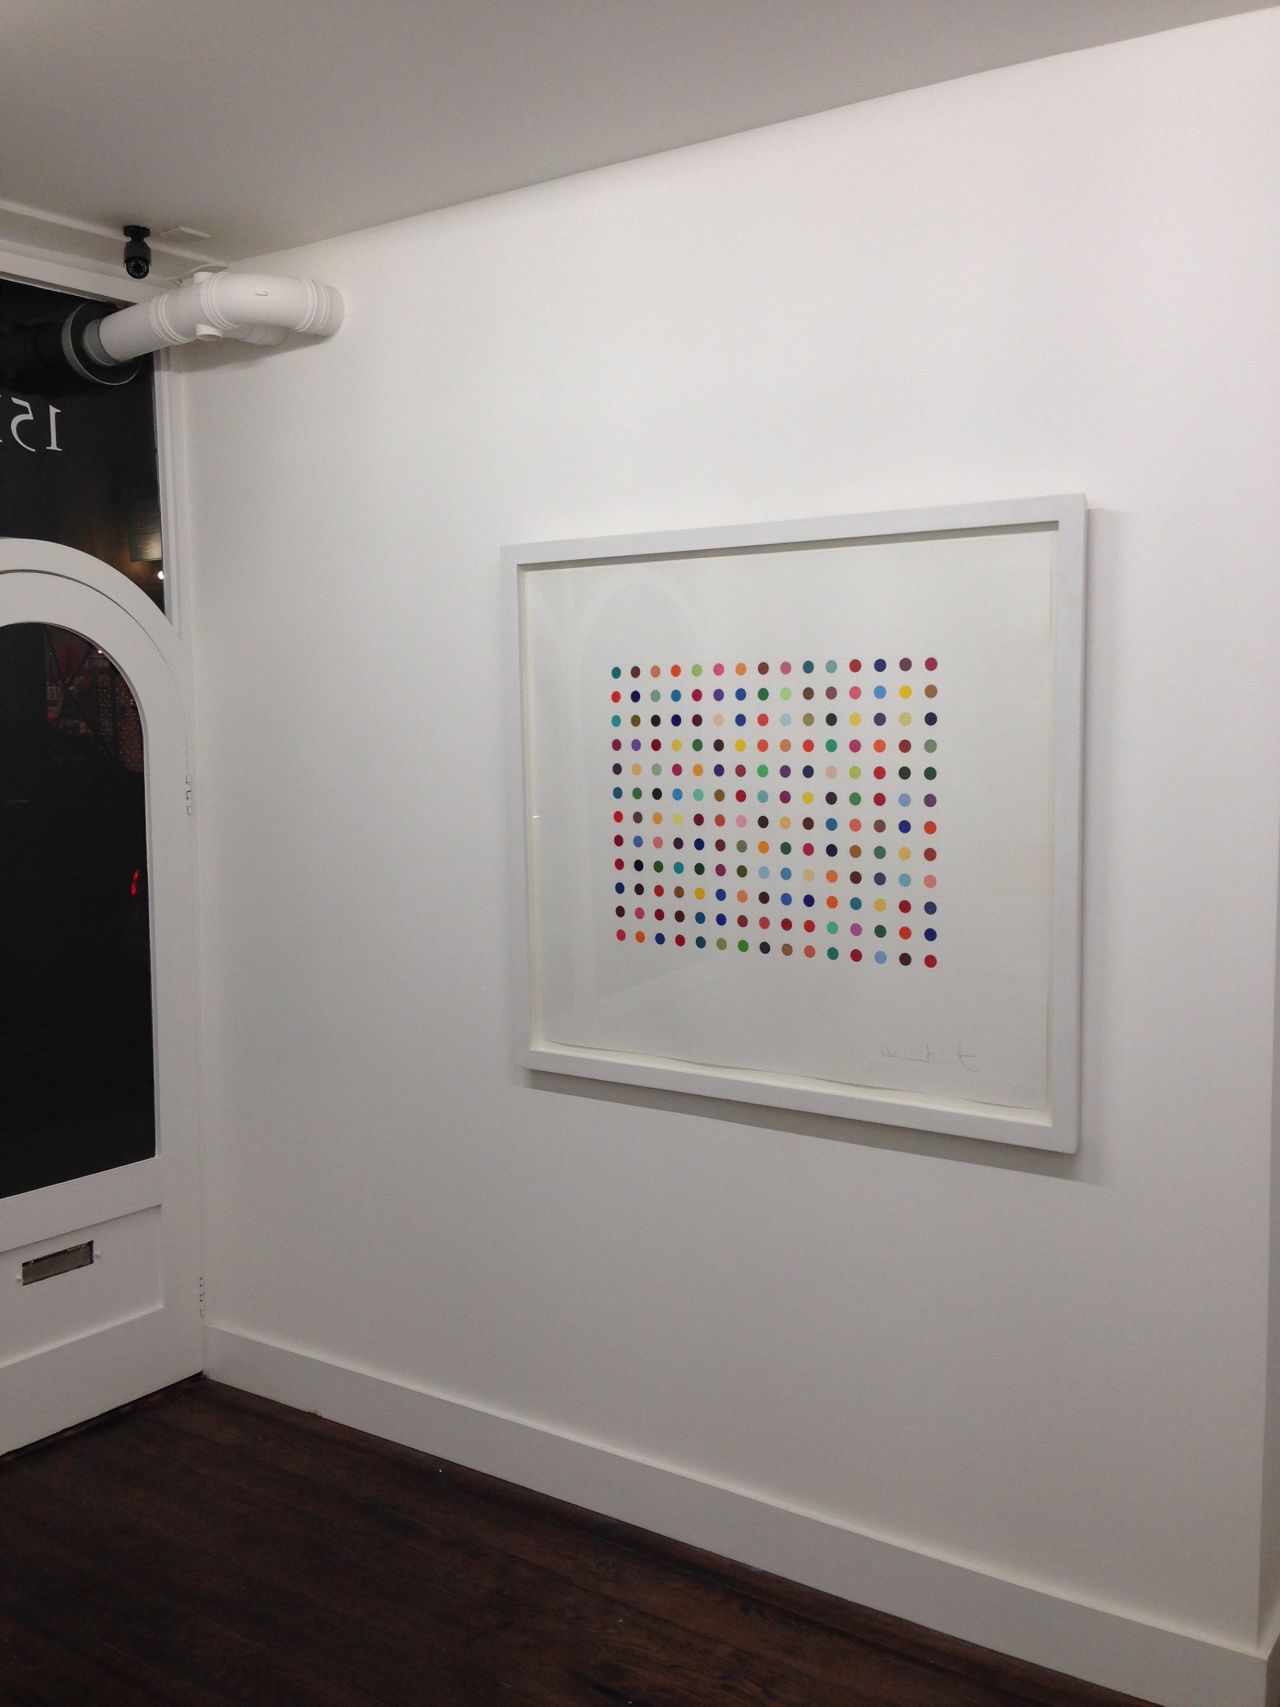 Two artworks by Damien Hirst have been stolen from a London Gallery. "Pyronin Y", seen hanging in the Exhibitionist Gallery before the theft on December 9, 2013, is worth £15,000 ($24,565).